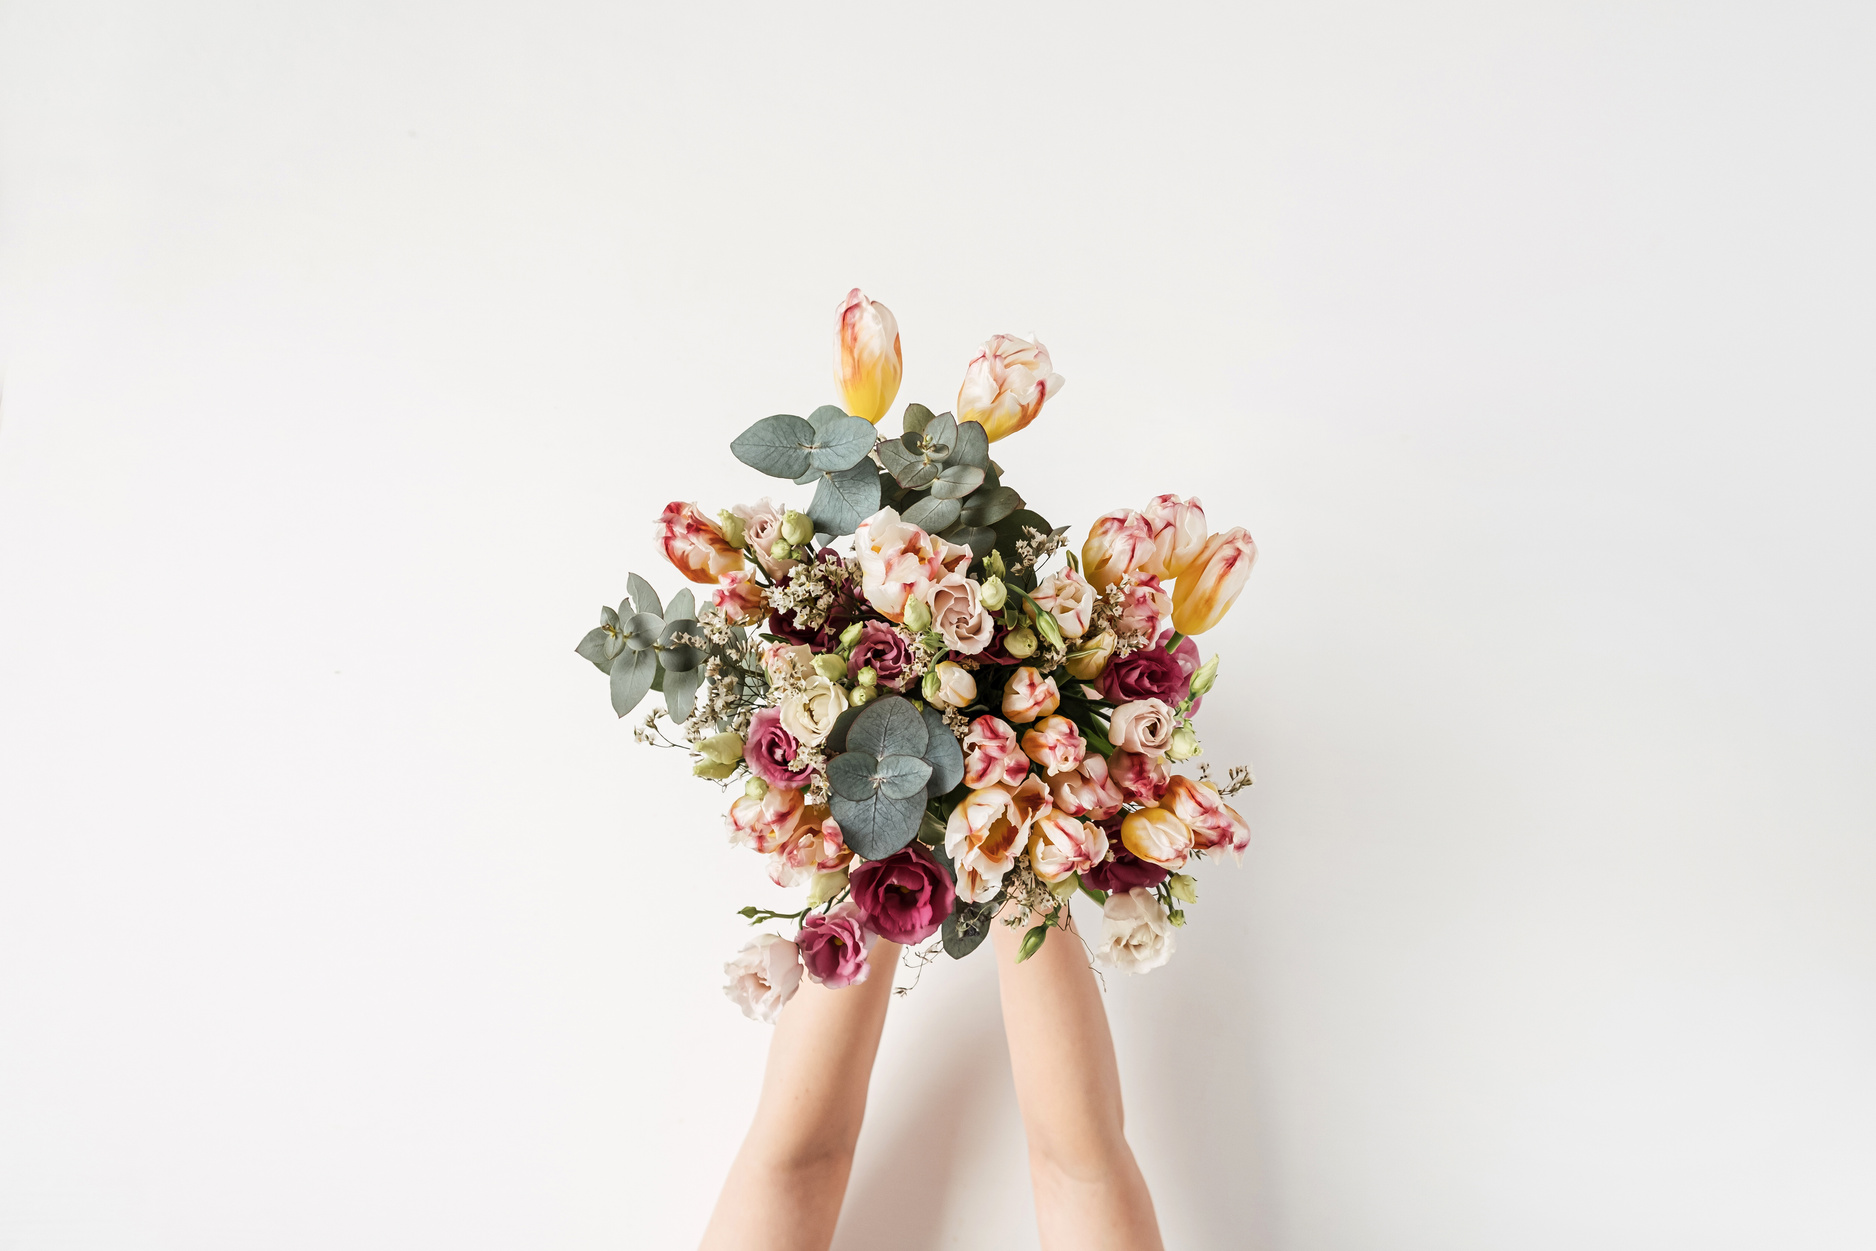 Hands Holding Bouquet of Flowers